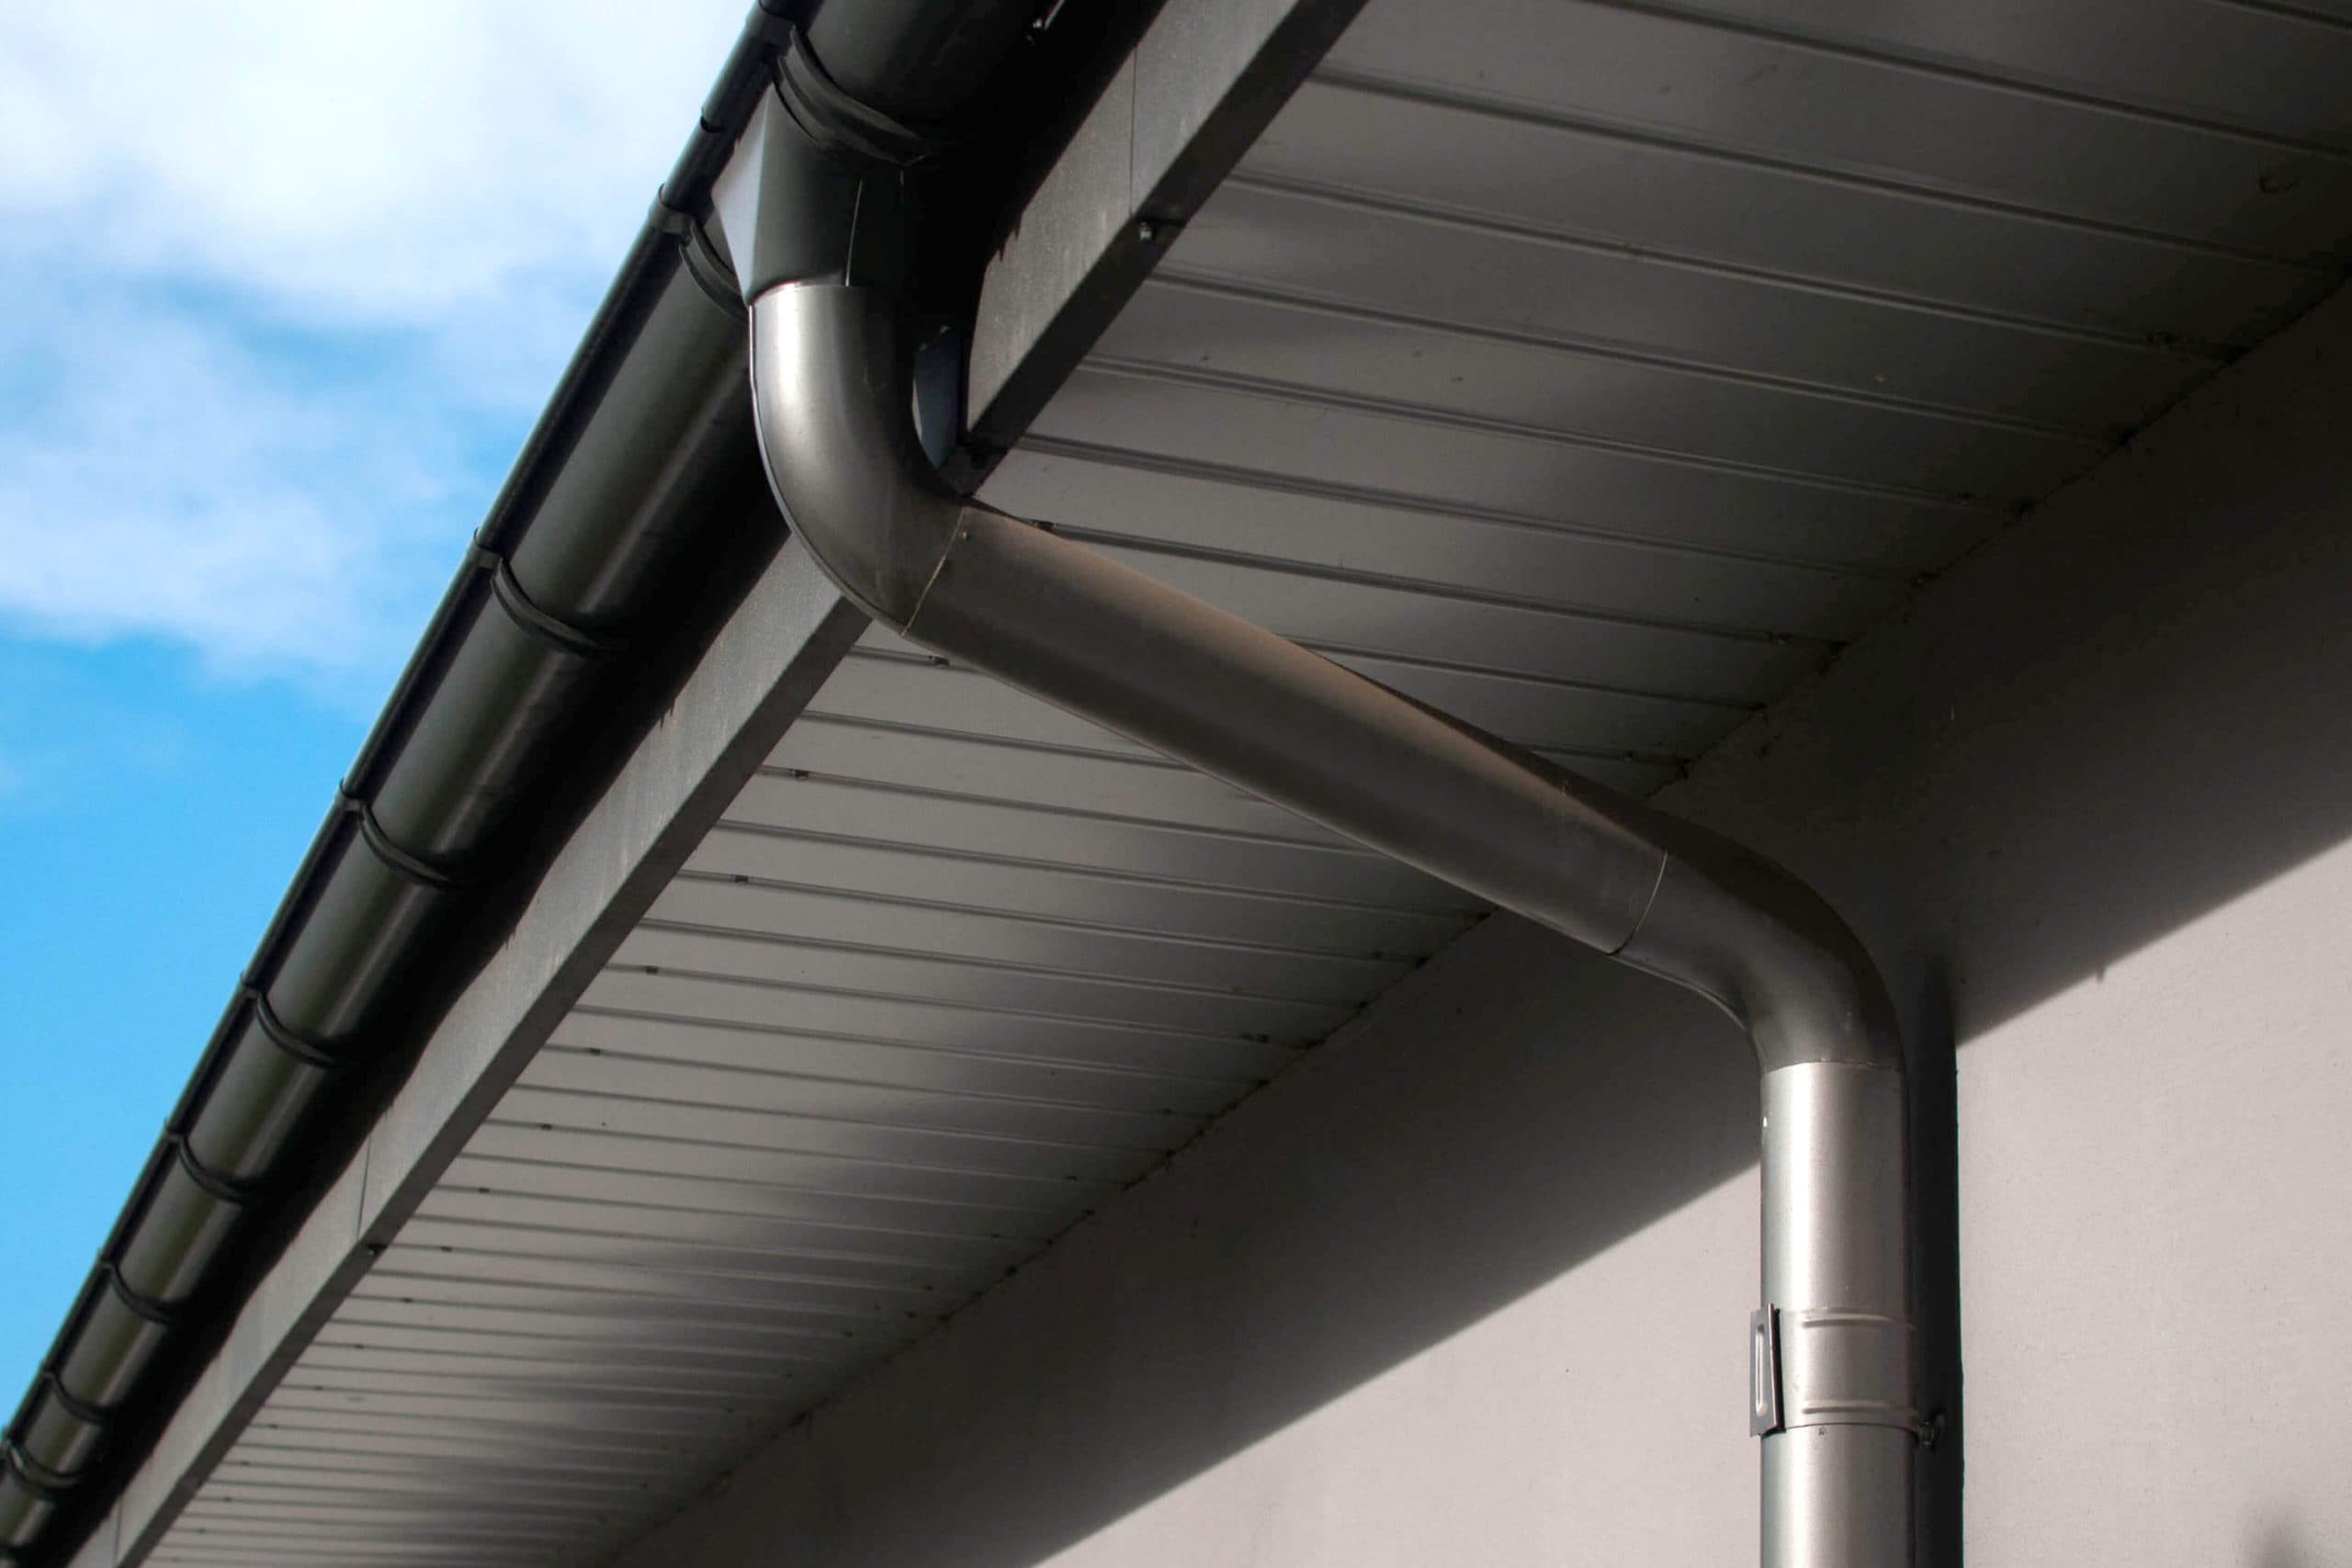 Corrosion-resistant galvanized gutters installed on a commercial building in Vienna